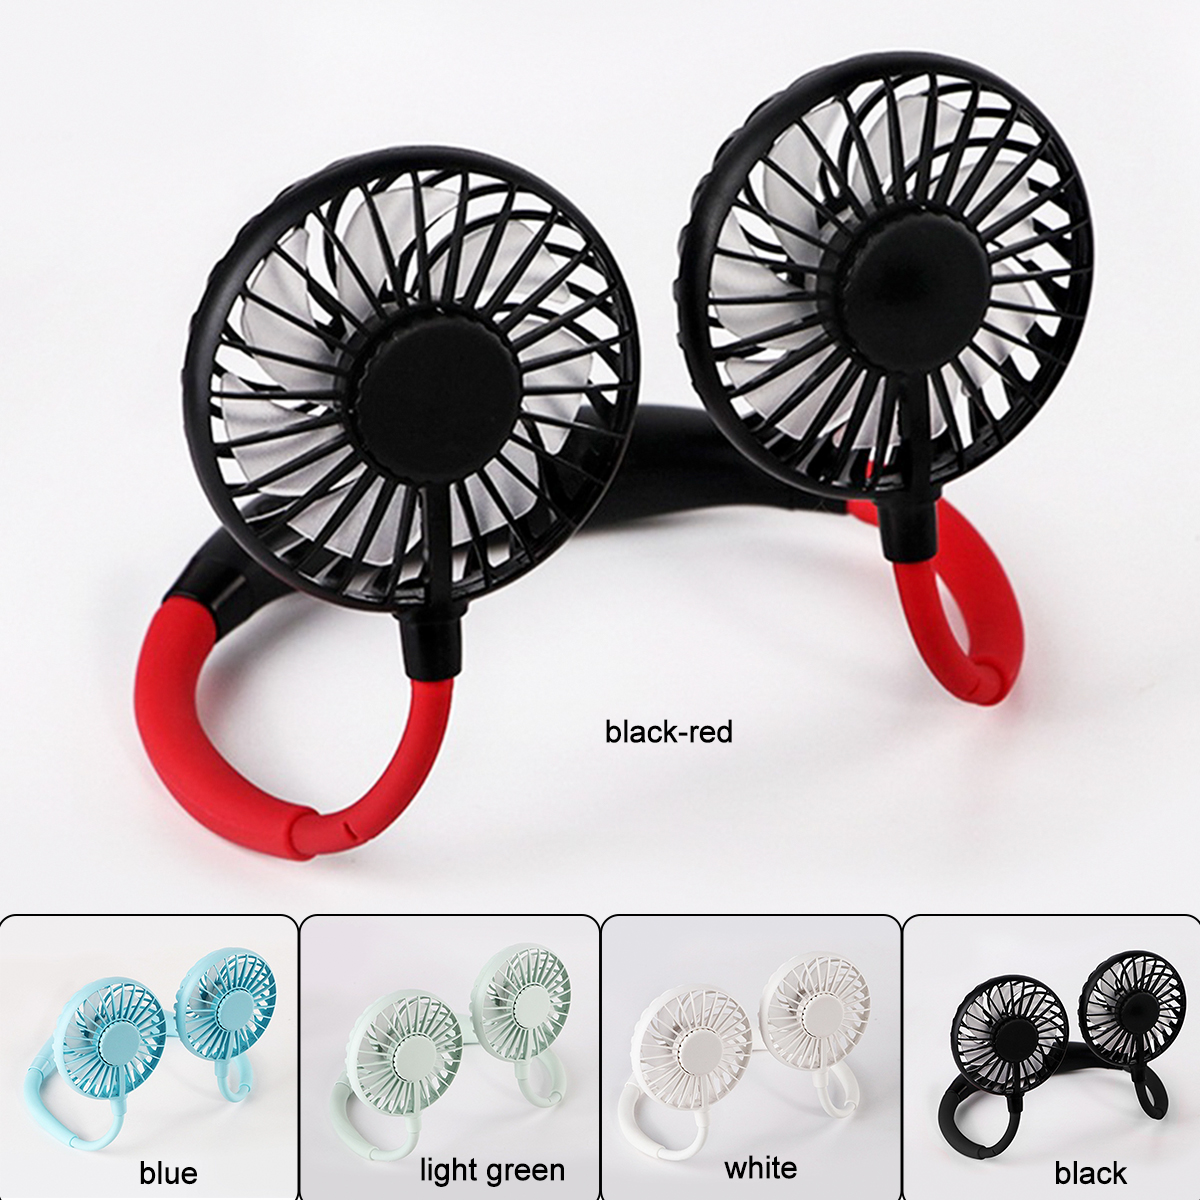 1200mah-3-Gear-LED-USB-Rechargeable-Portable-Hanging-Neck-Fan-Rechargeable-Aromatherapy-Cooling-Fan--1716094-5